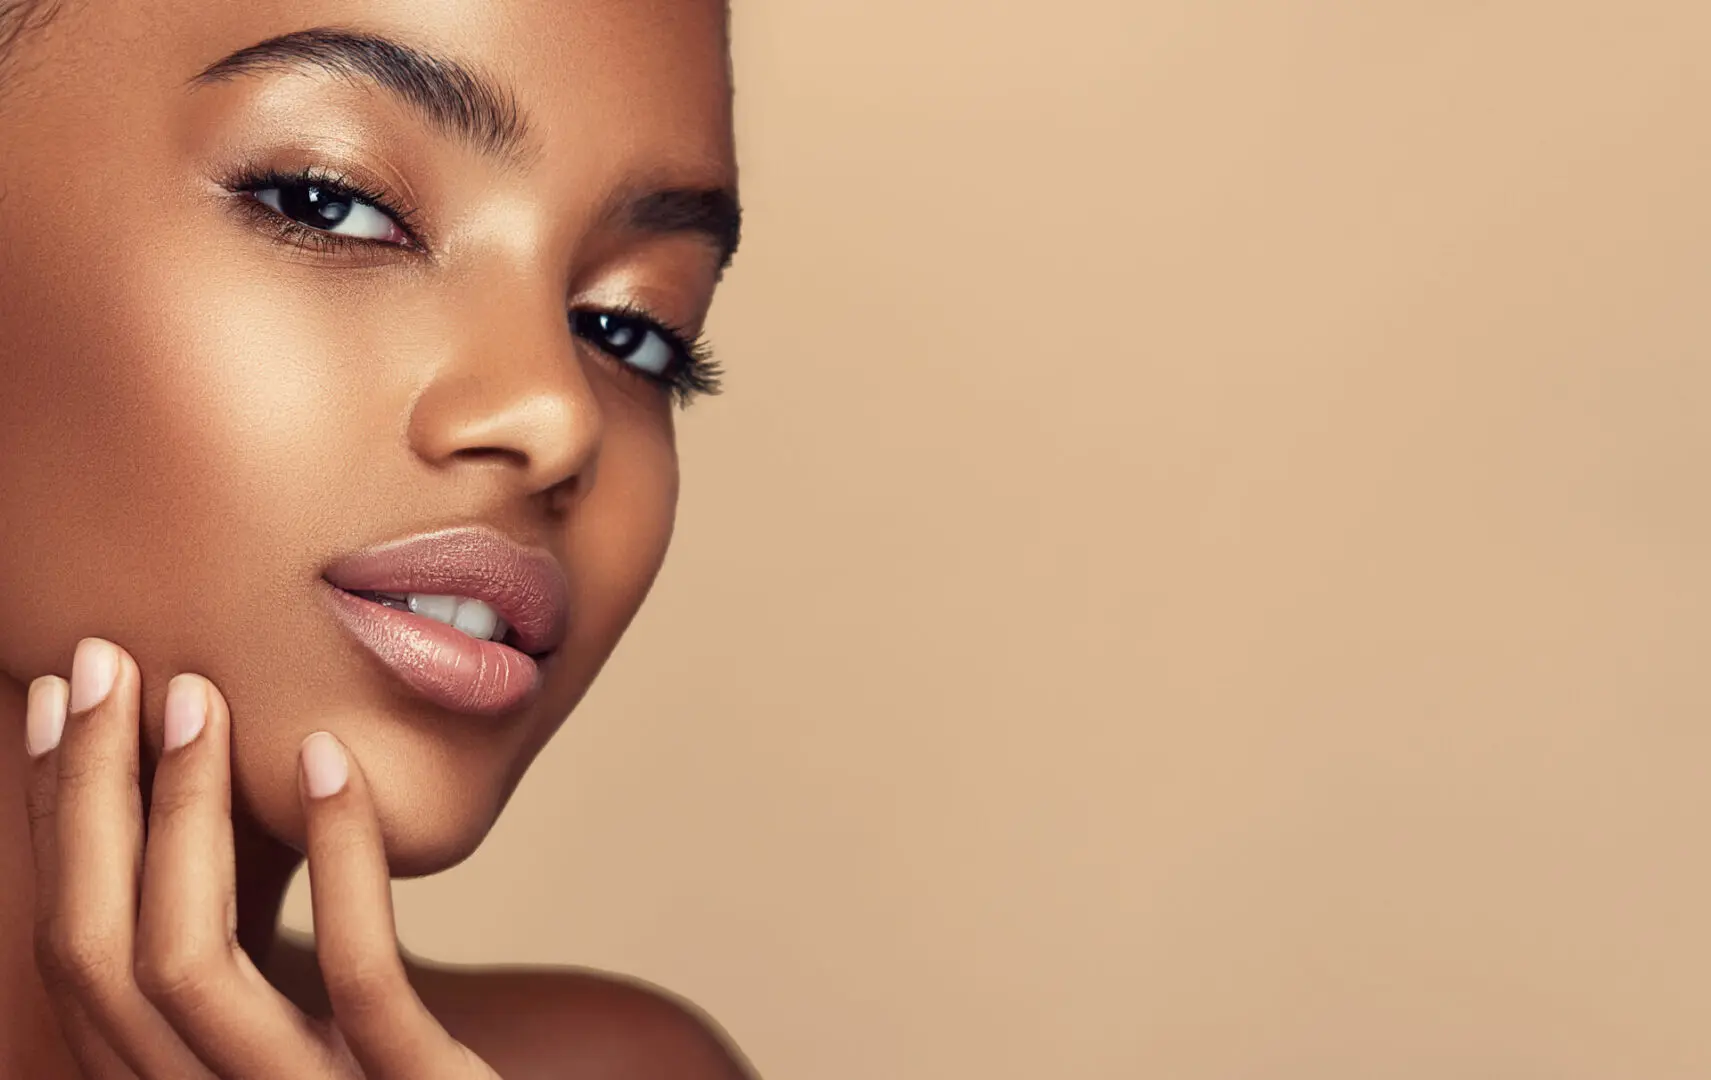 Pearl teeth behind ripe well shaped rose lips and soft, kind look of black eyes. Close up portrait of young, beautiful model with with vibrant, melanin-rich skin tone. Beauty, makeup and cosmetology.